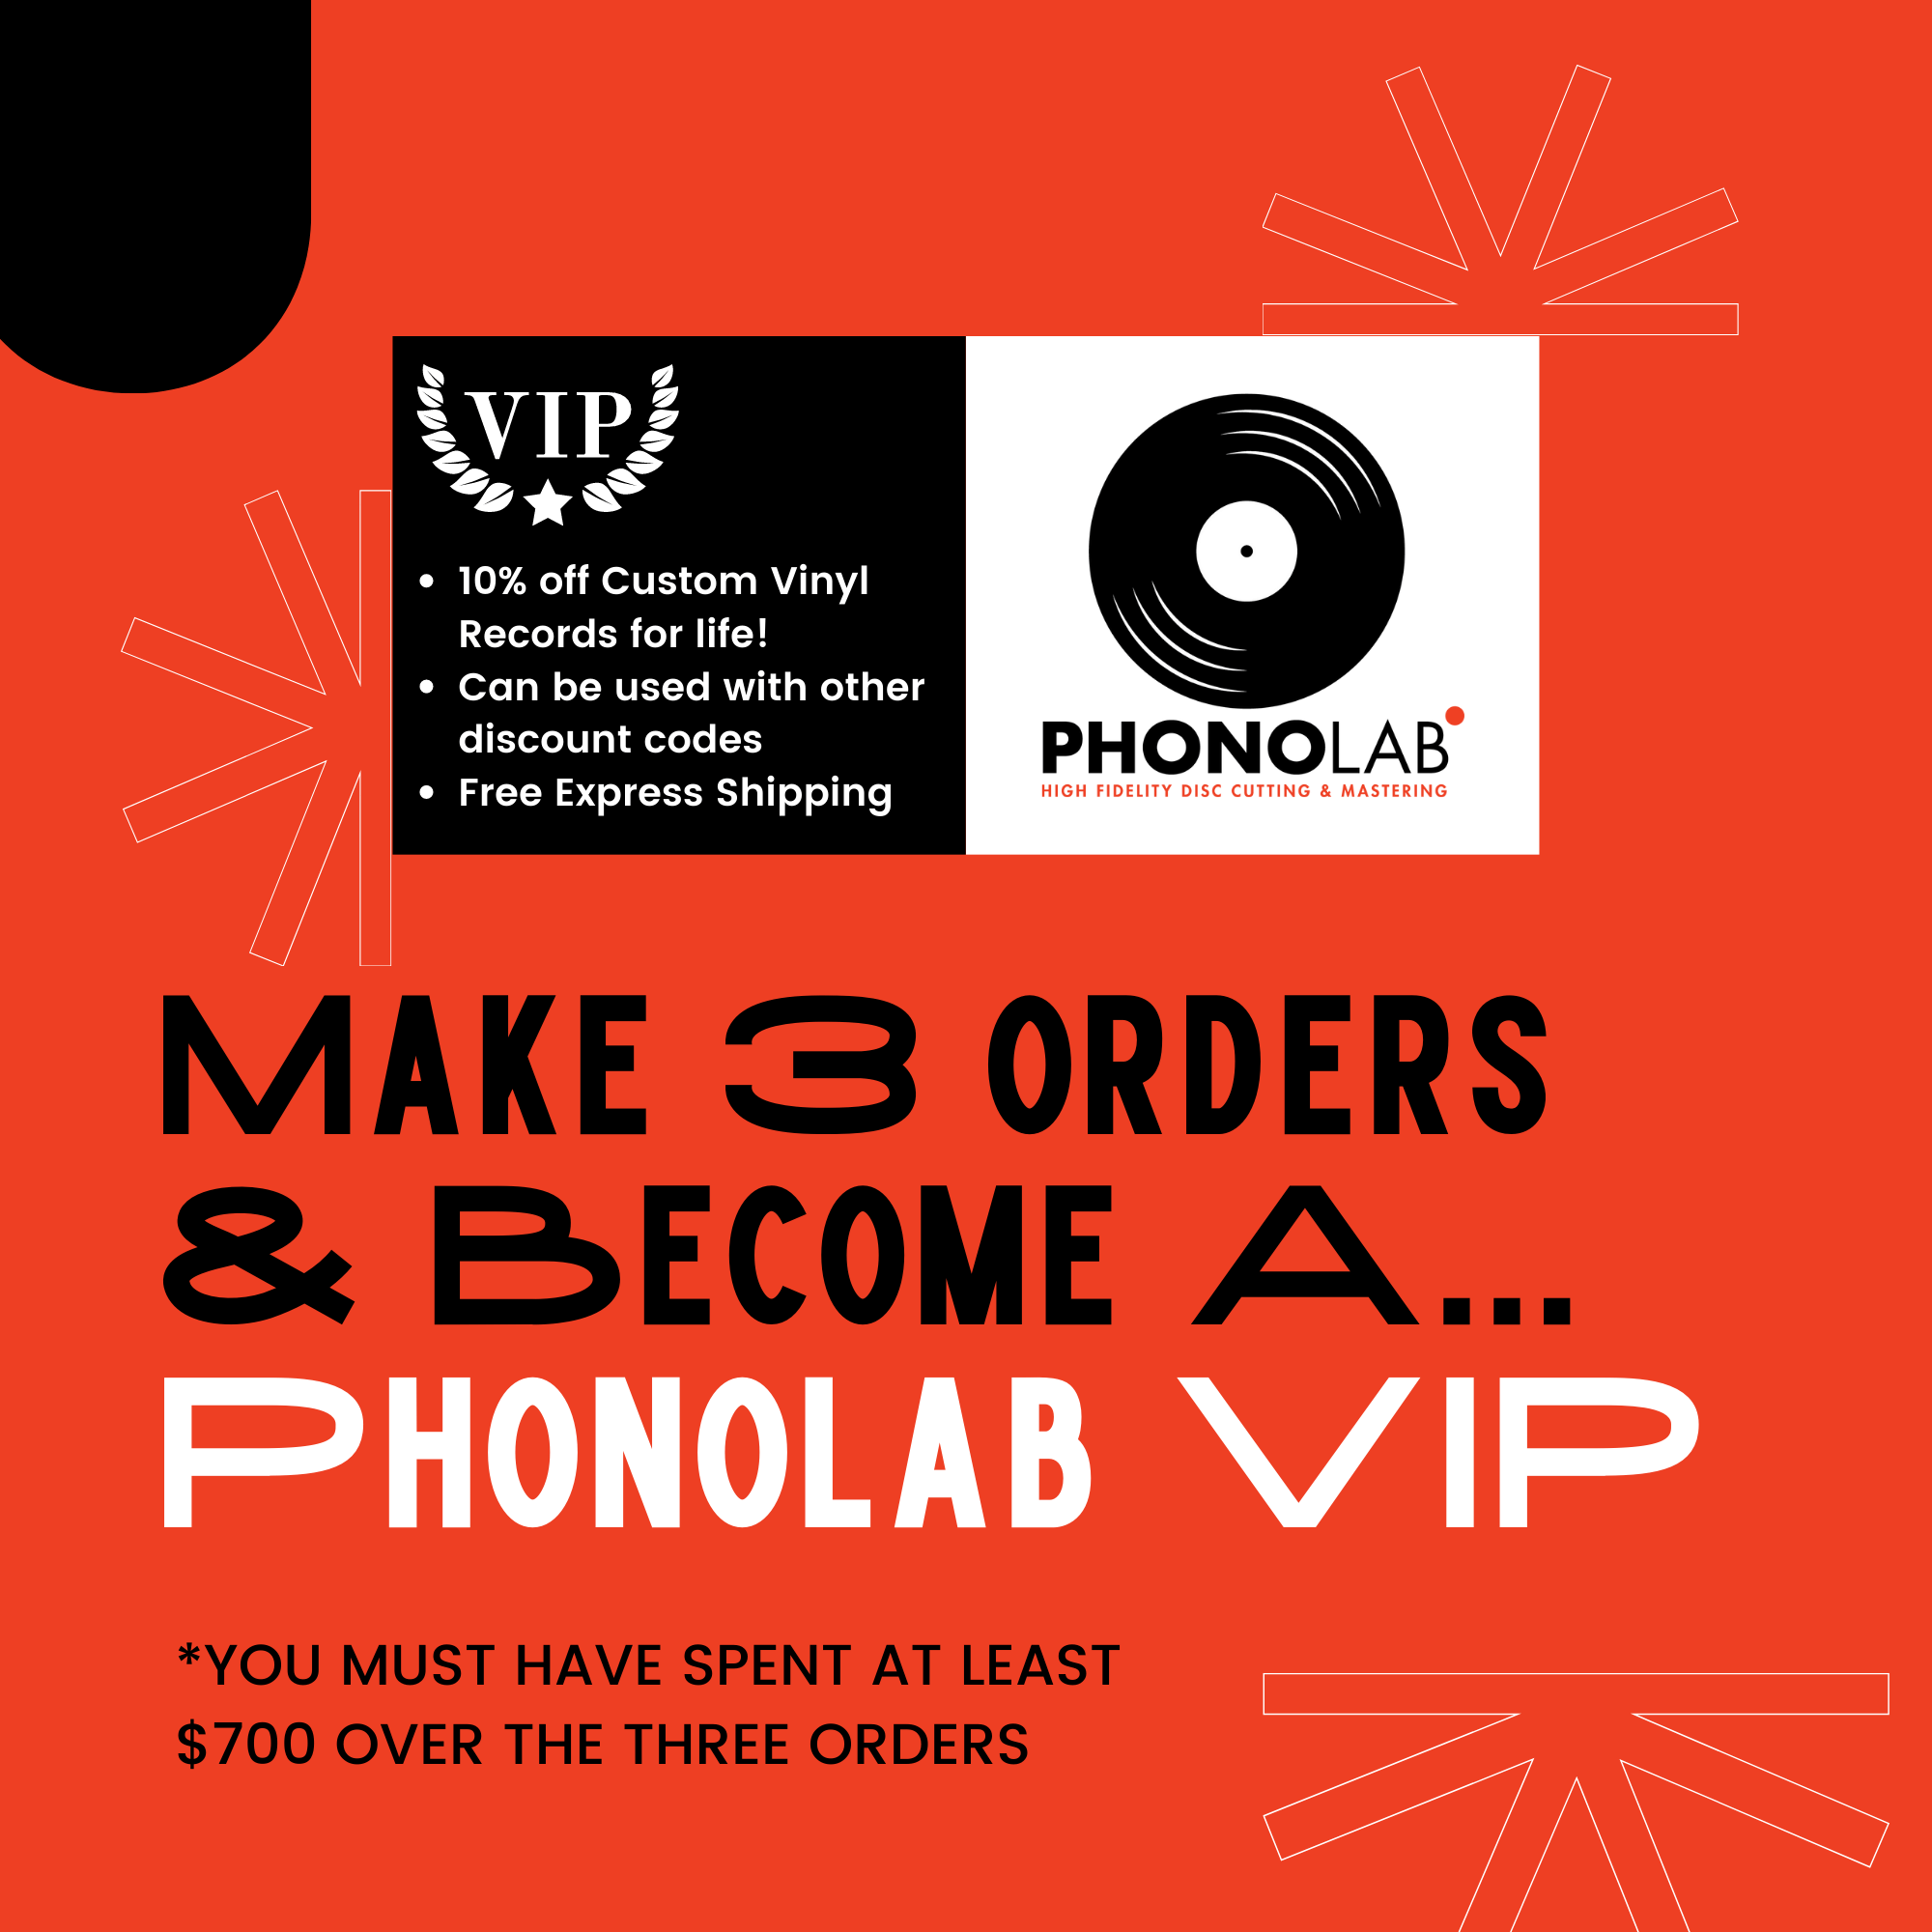 phonolab vip - make three orders and spend over $700 to join